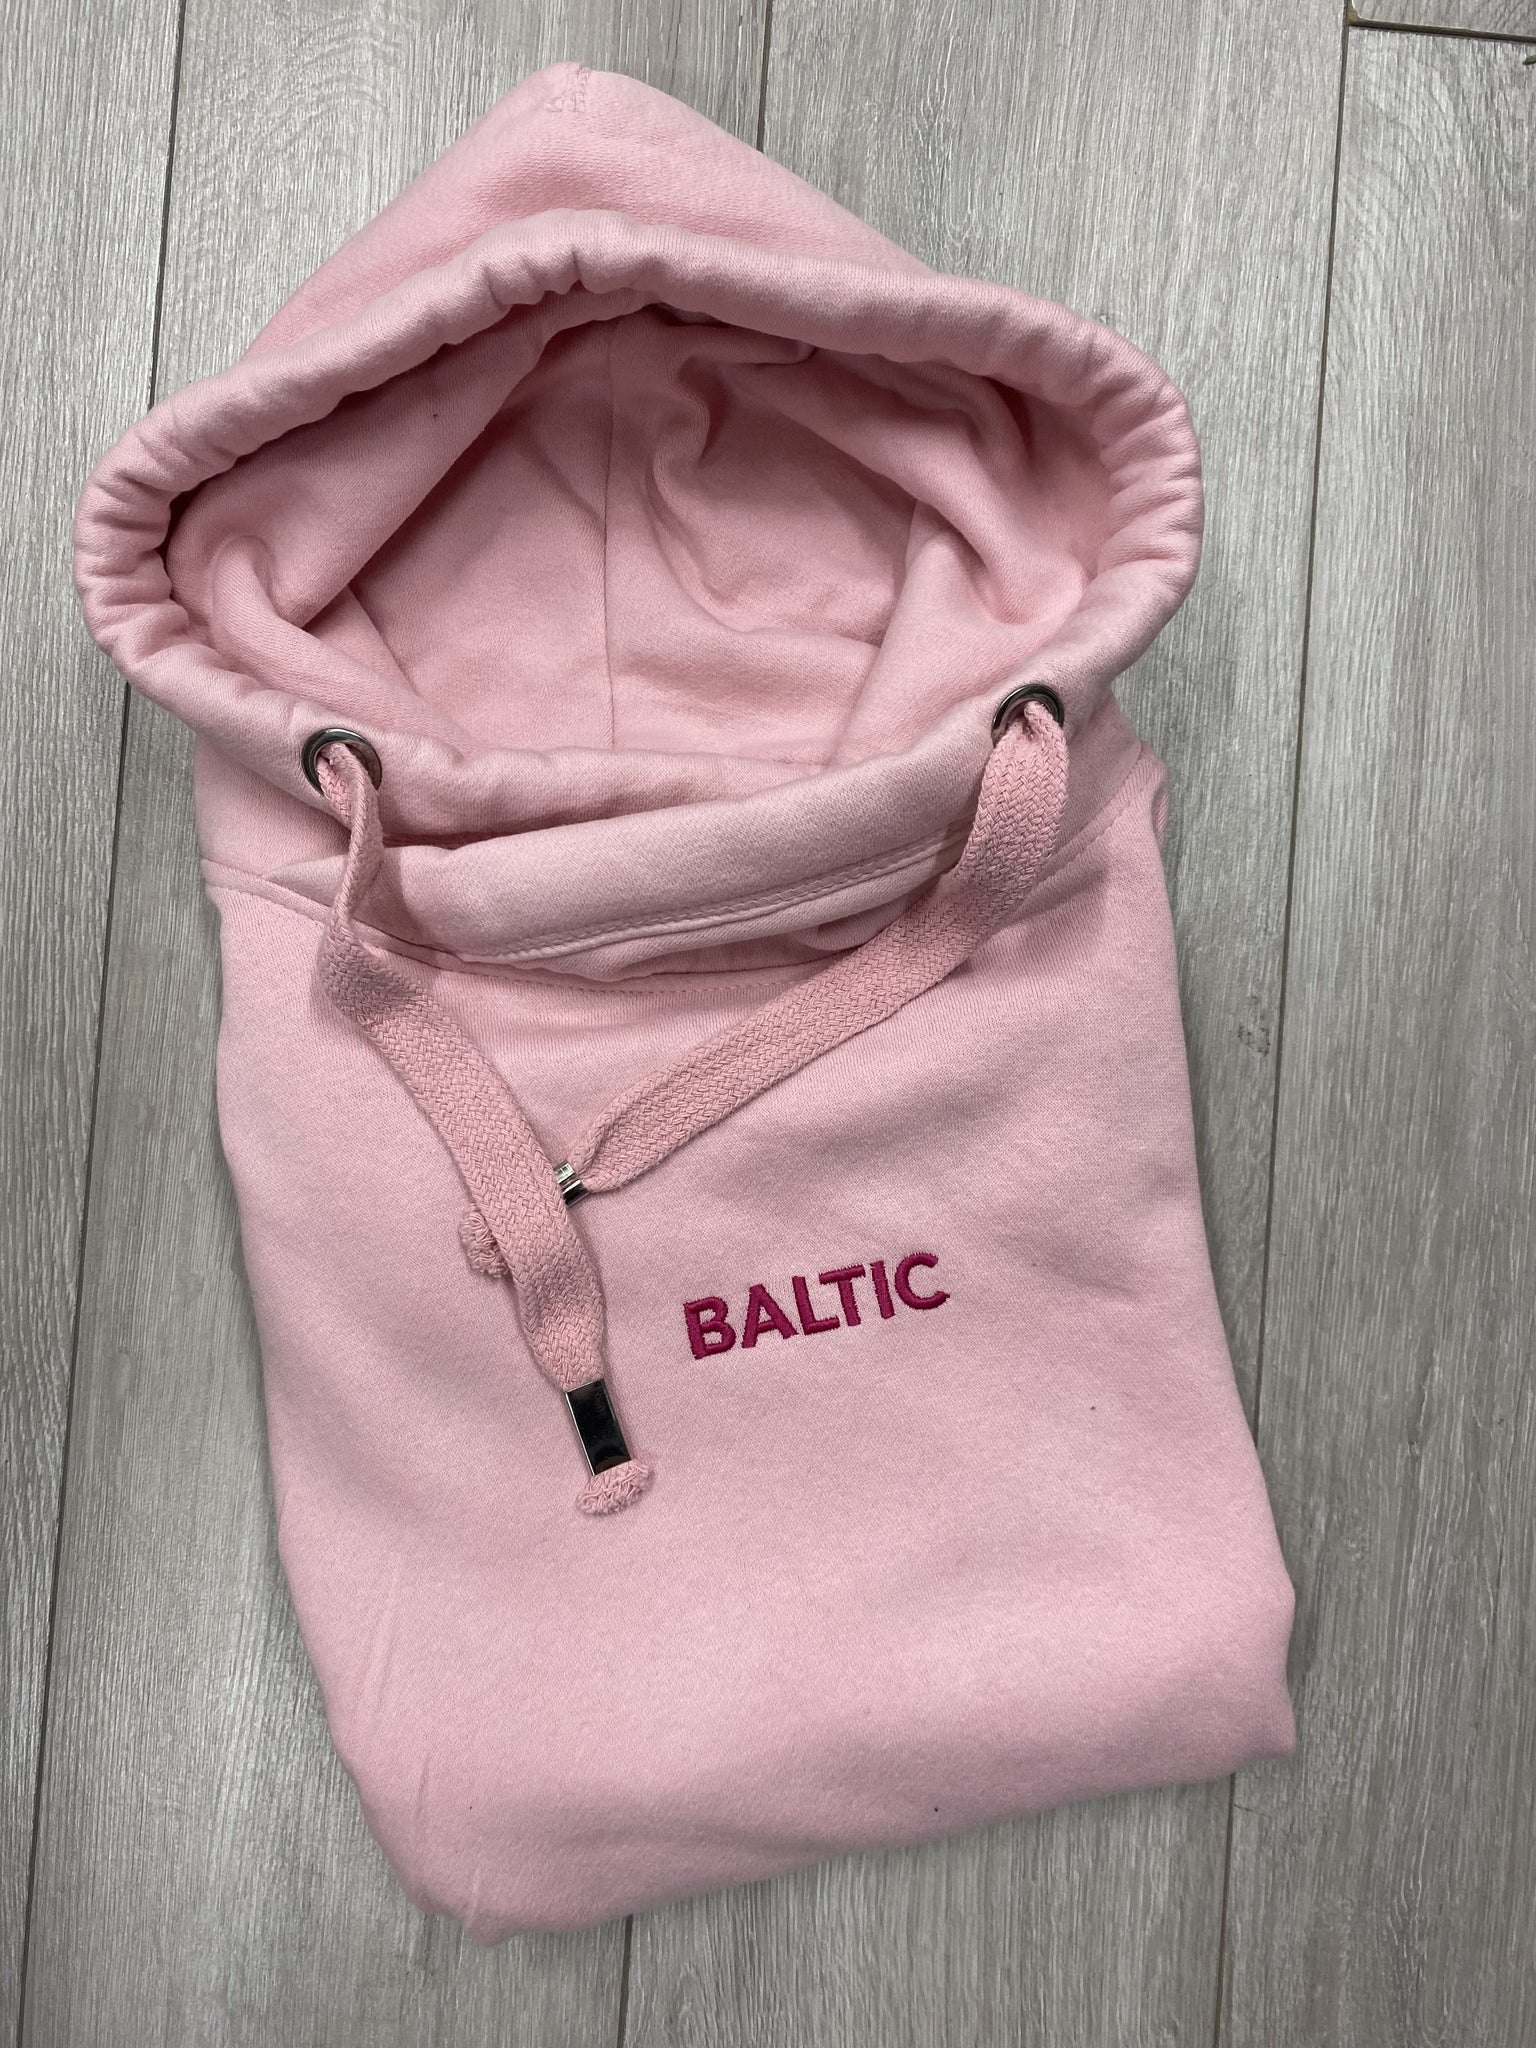 SAMPLE SALE Embroidered 'Baltic' Crossneck Hoodie, Baby Pink with Hot Pink Stitching